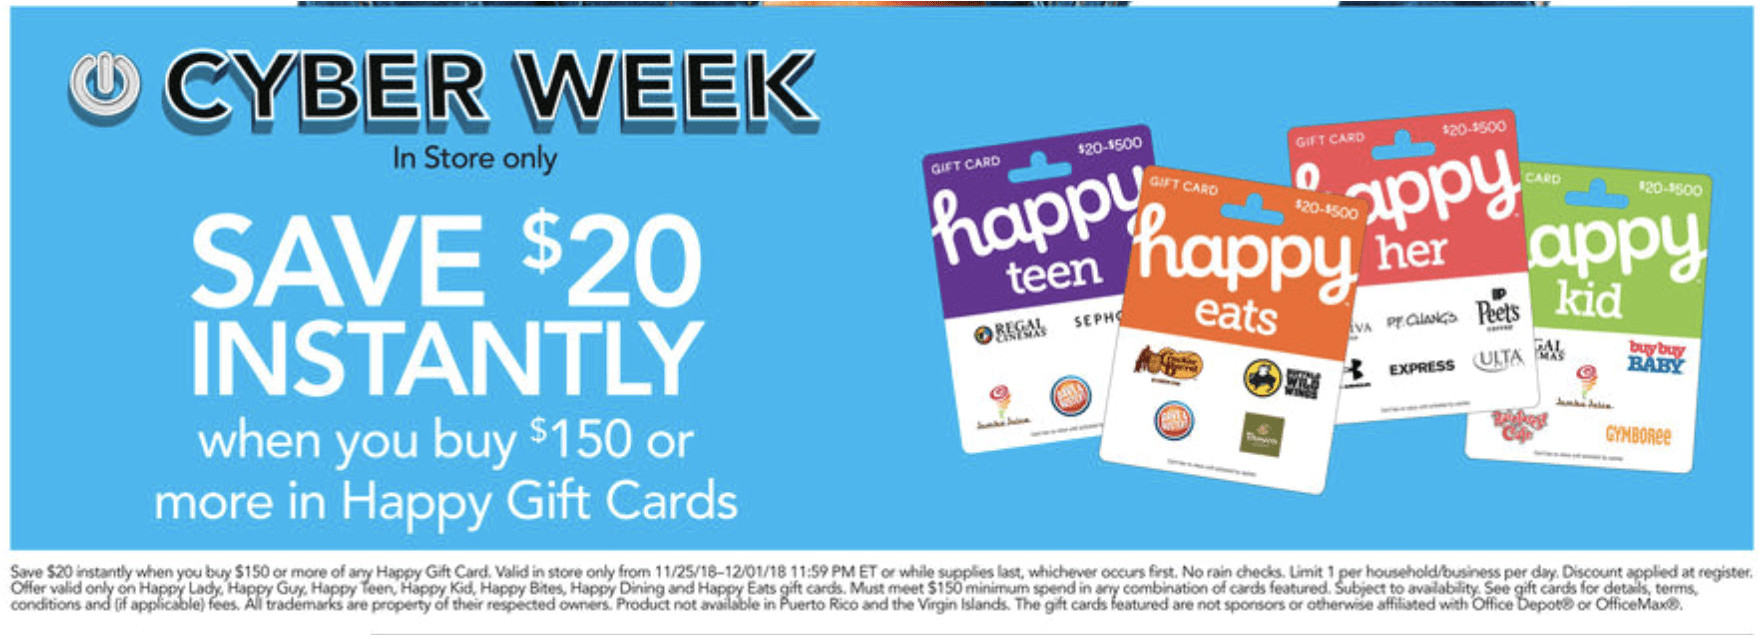 Comenity Bank Store Card Pre Approval Expired Office Depot Max 20 Discount when You Buy 150 or More In